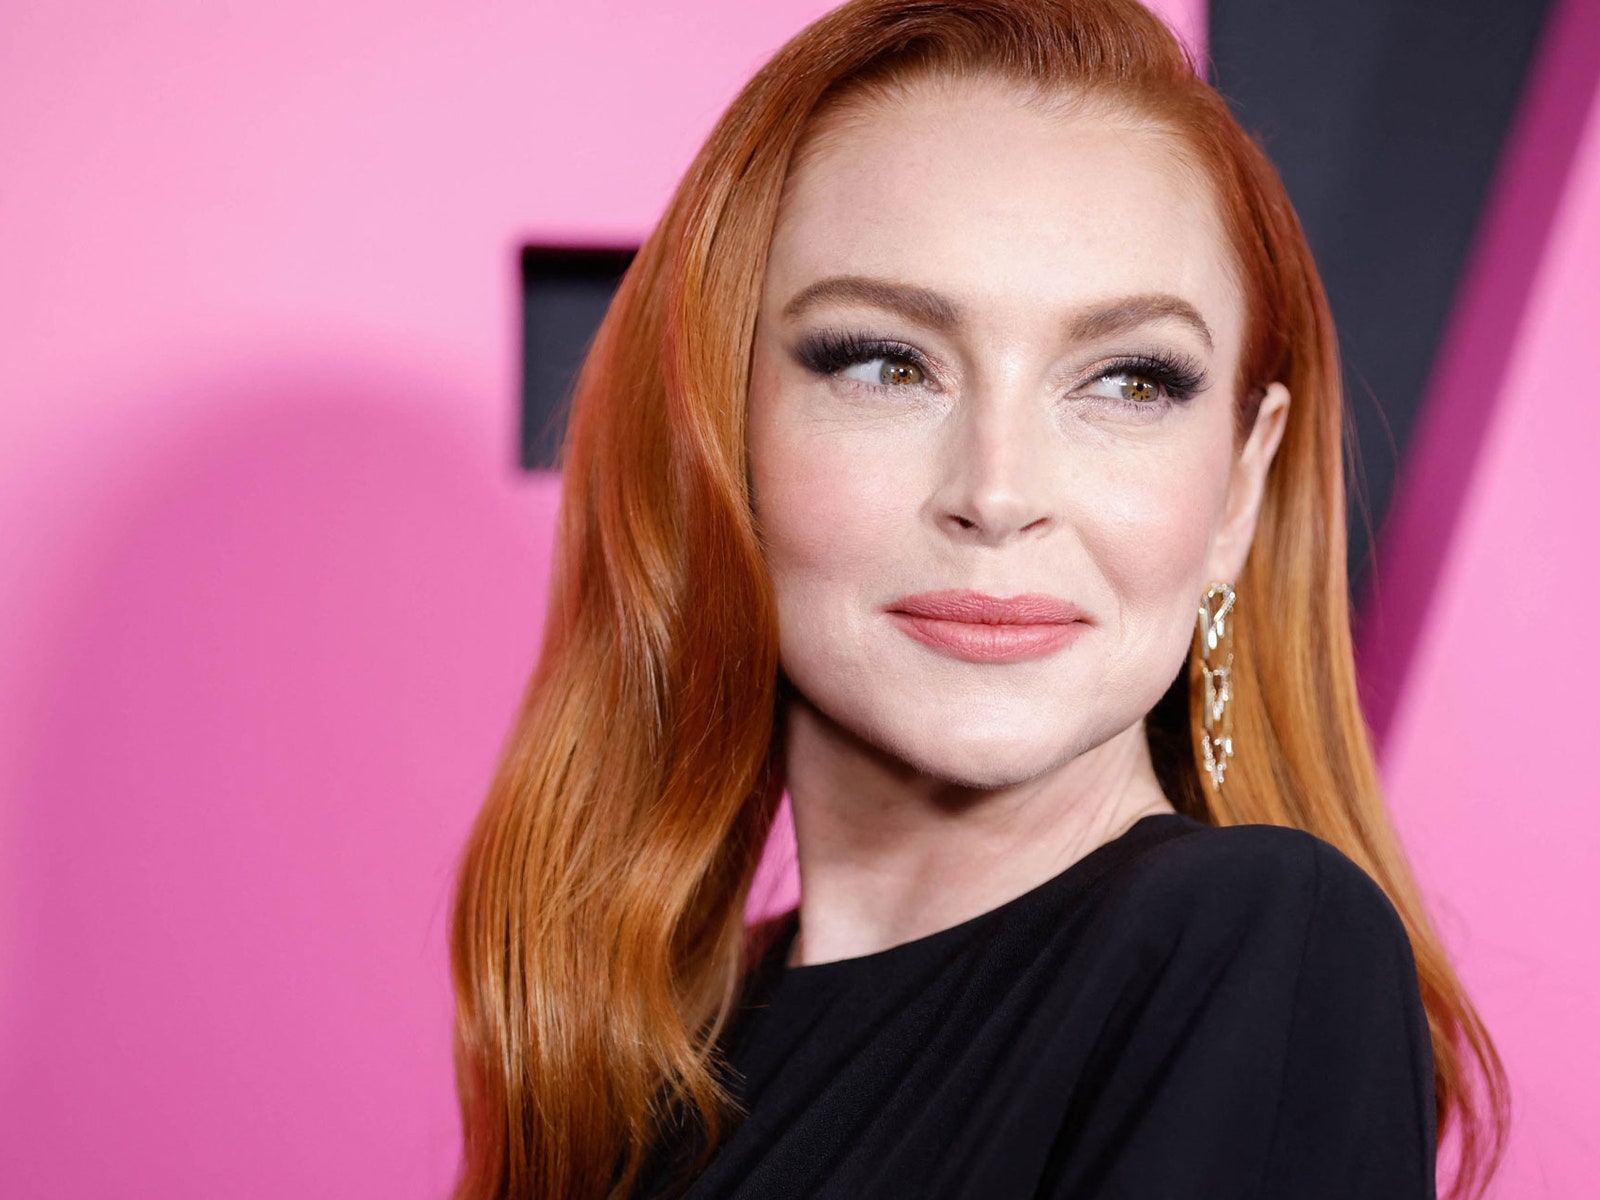 Lindsay Lohan's cutout dress at the Mean Girls premiere proves she's still a ‘regulation hottie’